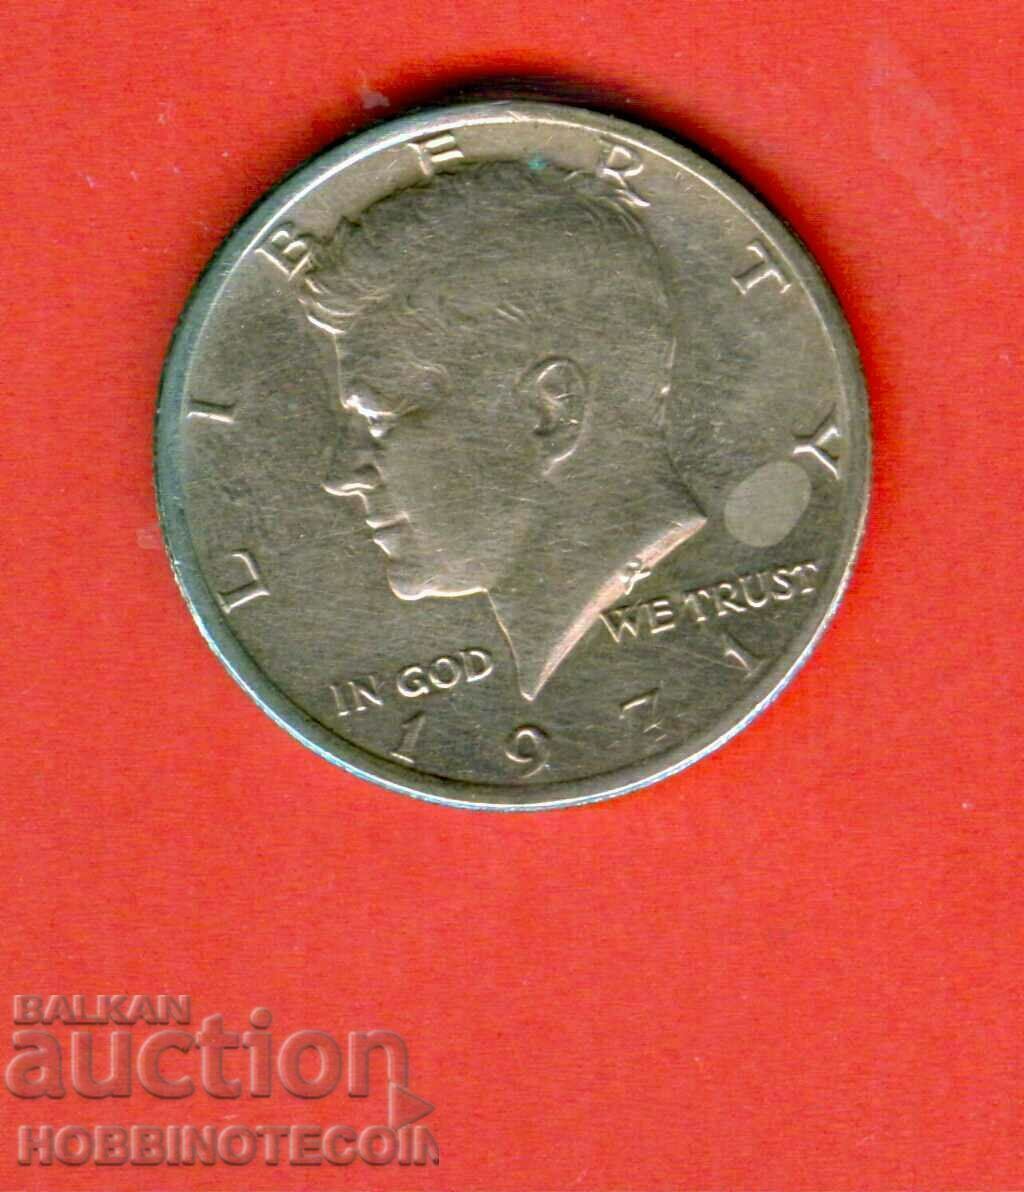 USA USA 50 cent 0.50 $ 1/2 $ issue issue 1971 KENNEDY